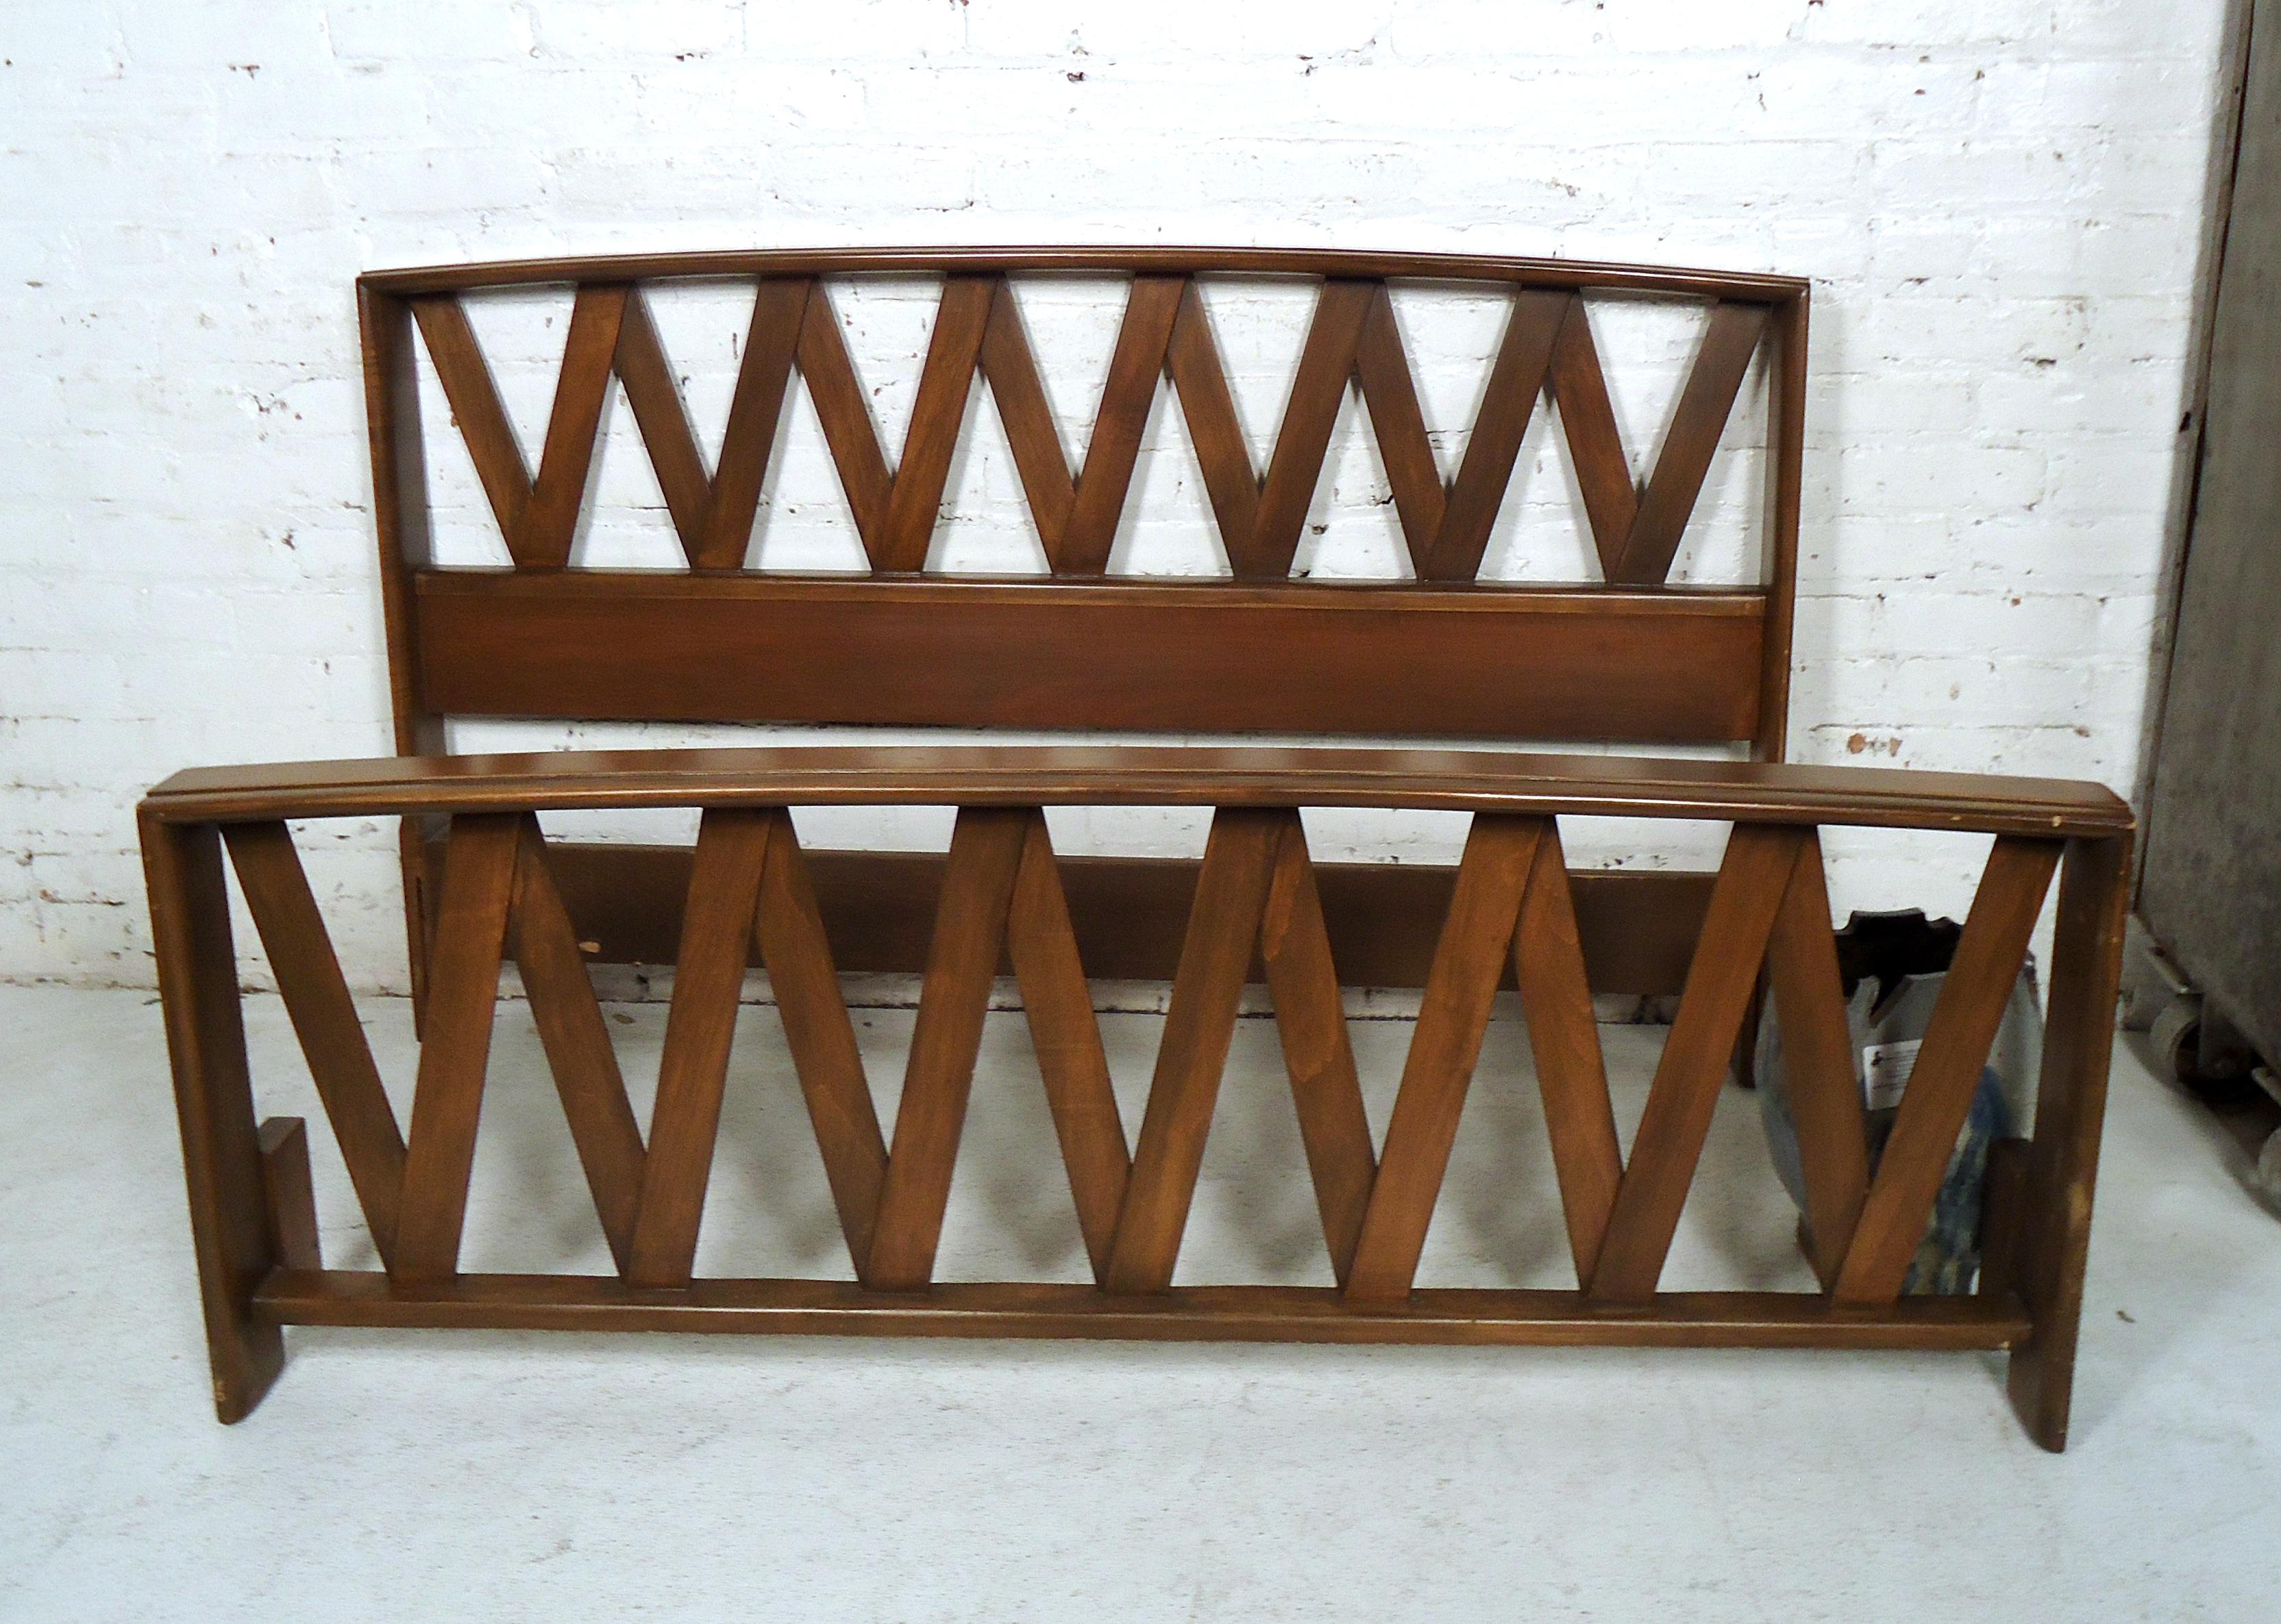 Gorgeous vintage modern bed frame by Paul Frankl features a dark finish, crisscross designed headboard and foot board.
(Please confirm item location - NY or NJ - with dealer).